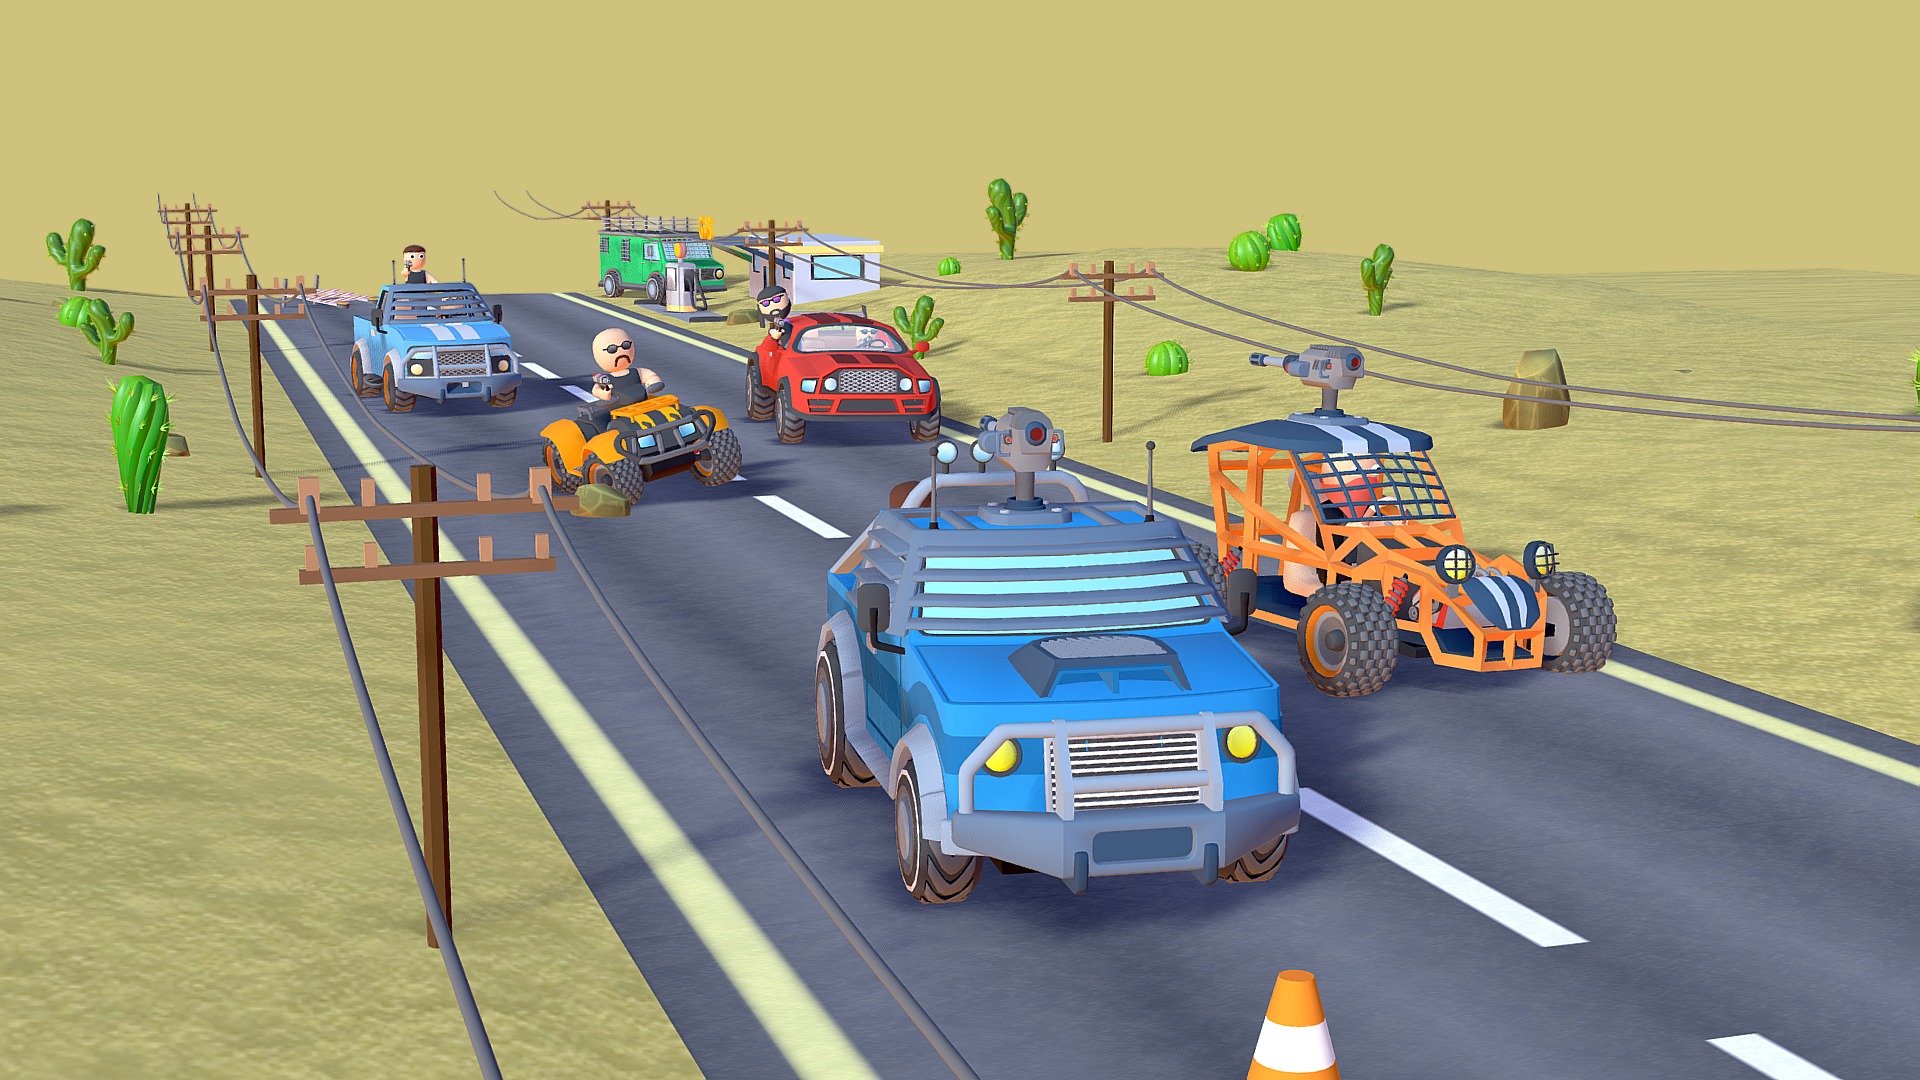 Highway Attack asset pack includes an atv, a buggy, a muscle cari a pickup truck and a van. The pack has a enemy gang and player crew. 

Player fights of enemies using turrets mounted on cars and with riders. The game is set in a desert environment, includingi electric poles and occasional buildings 3d model